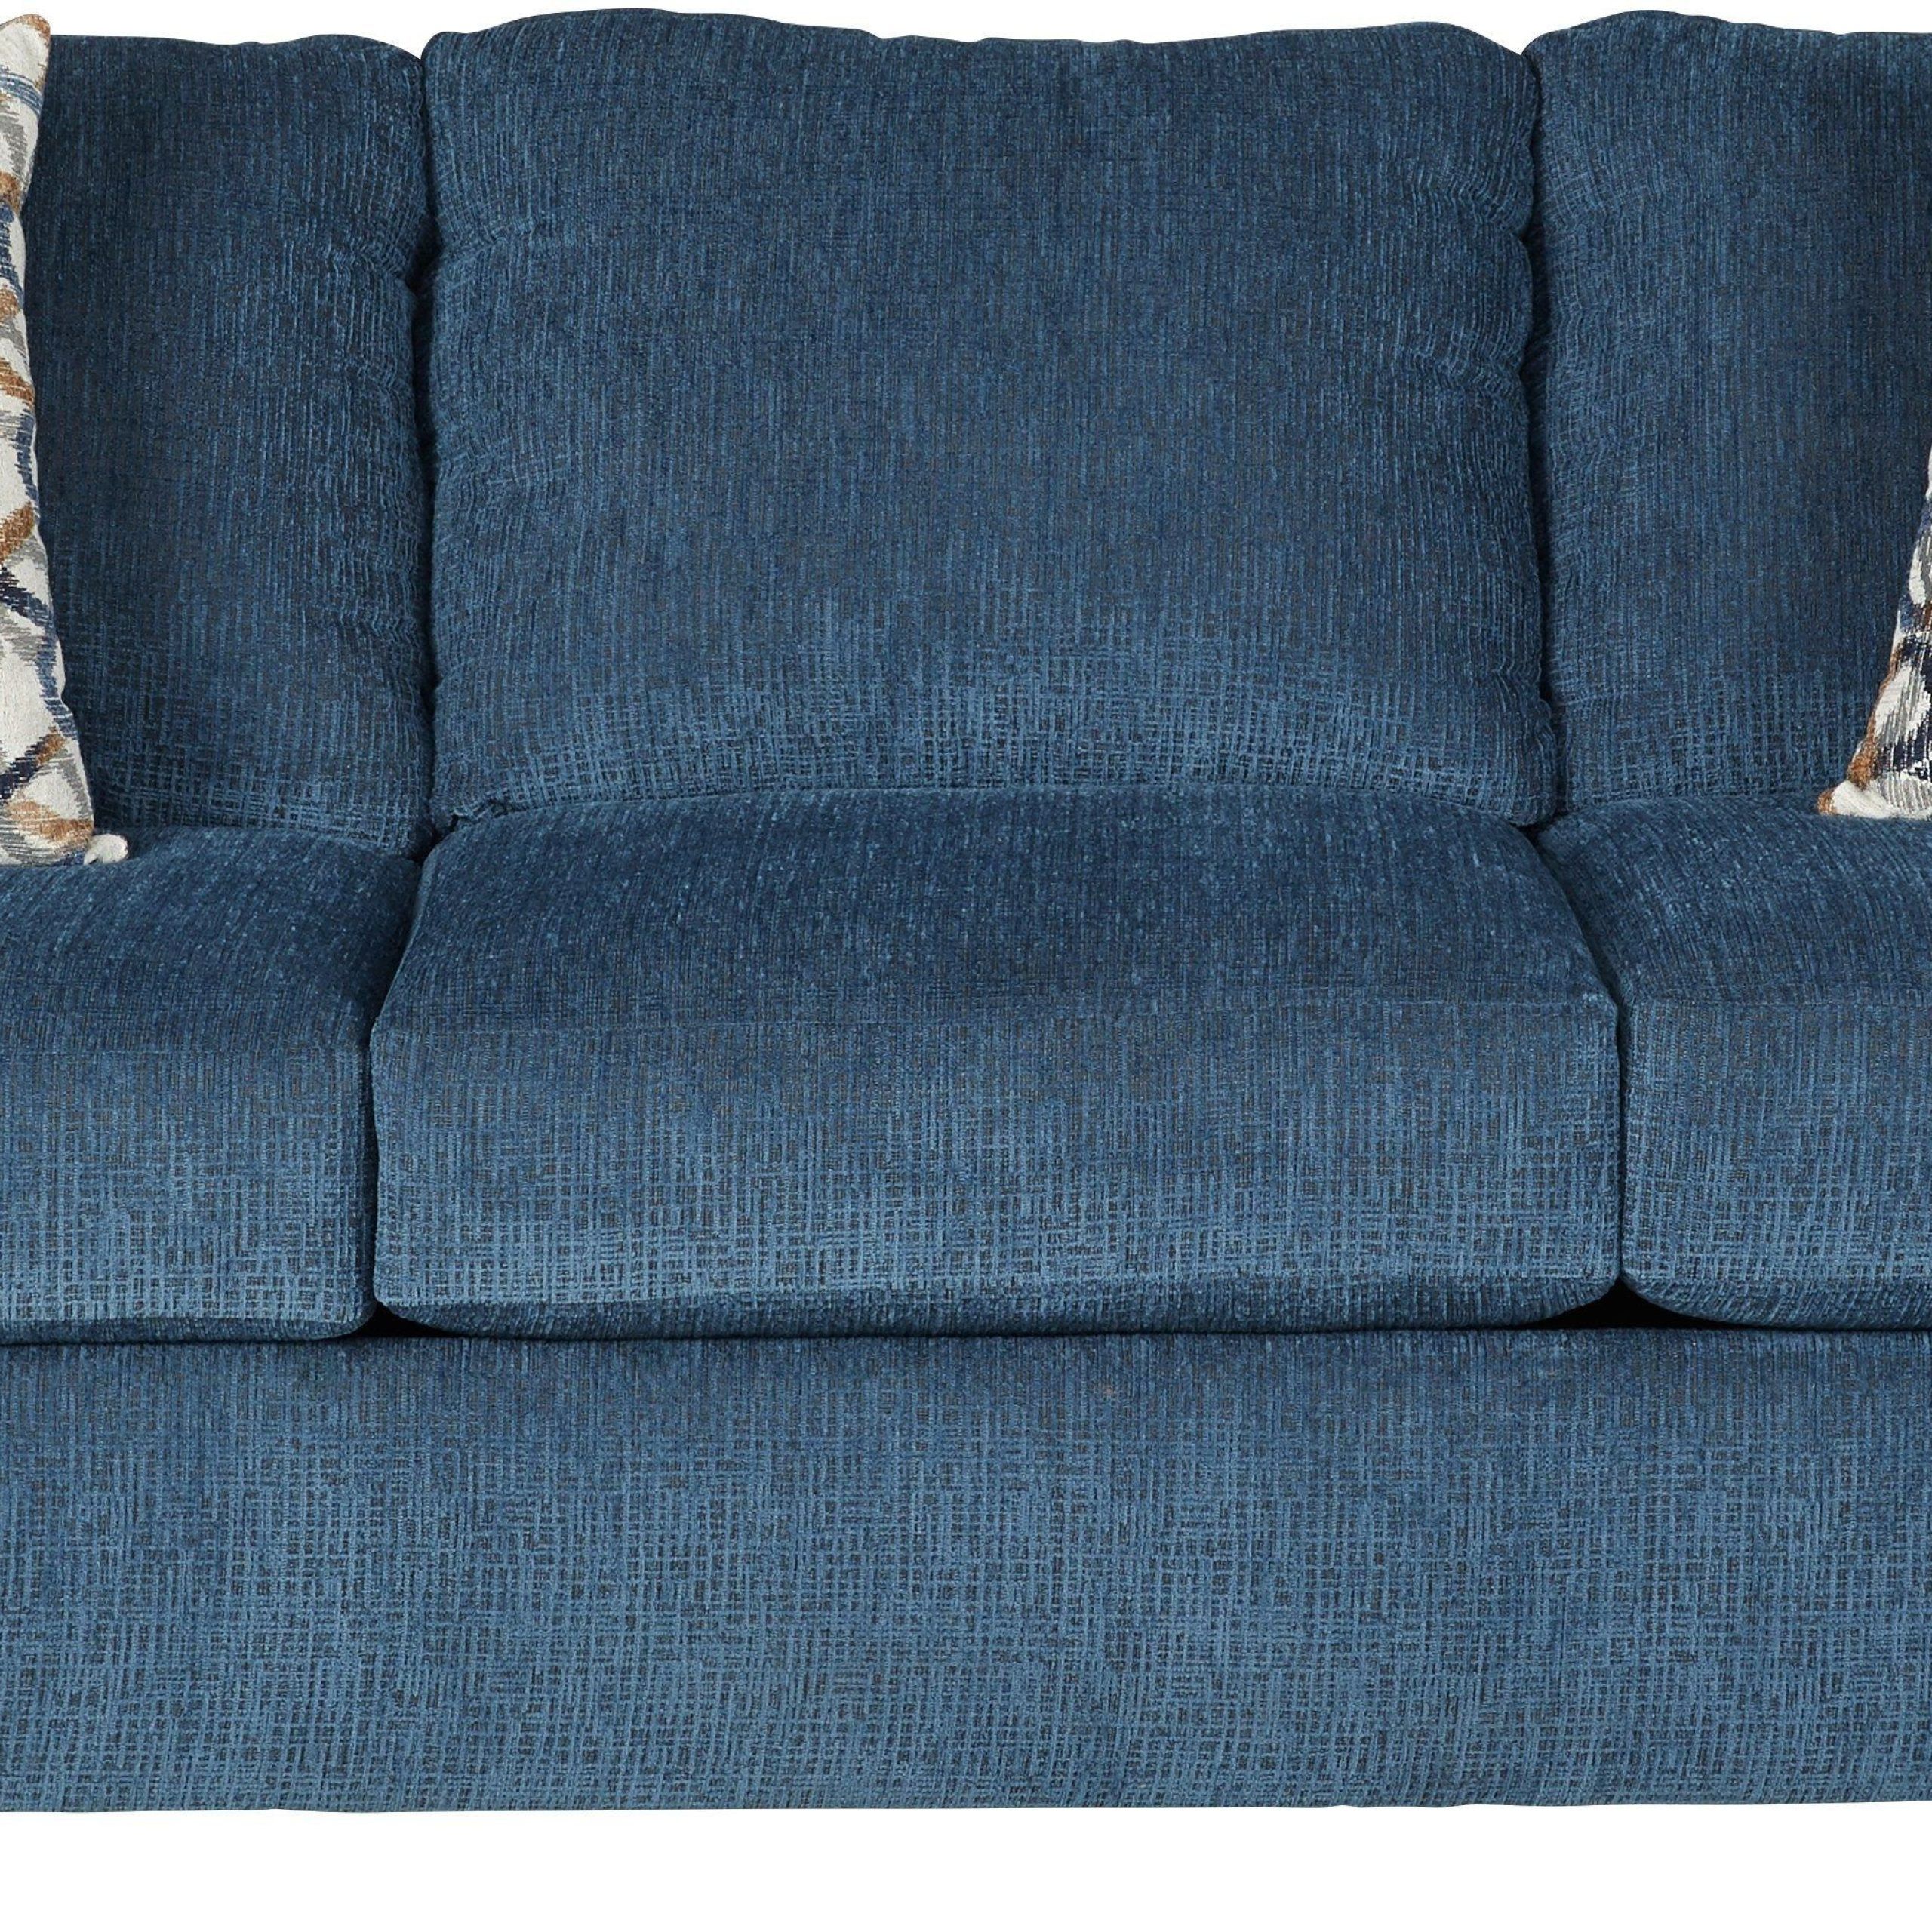 Navy Blue Living Room Set Inspirational Lucan Navy Sleeper In 2019 Within Navy Sleeper Sofa Couches (View 14 of 20)